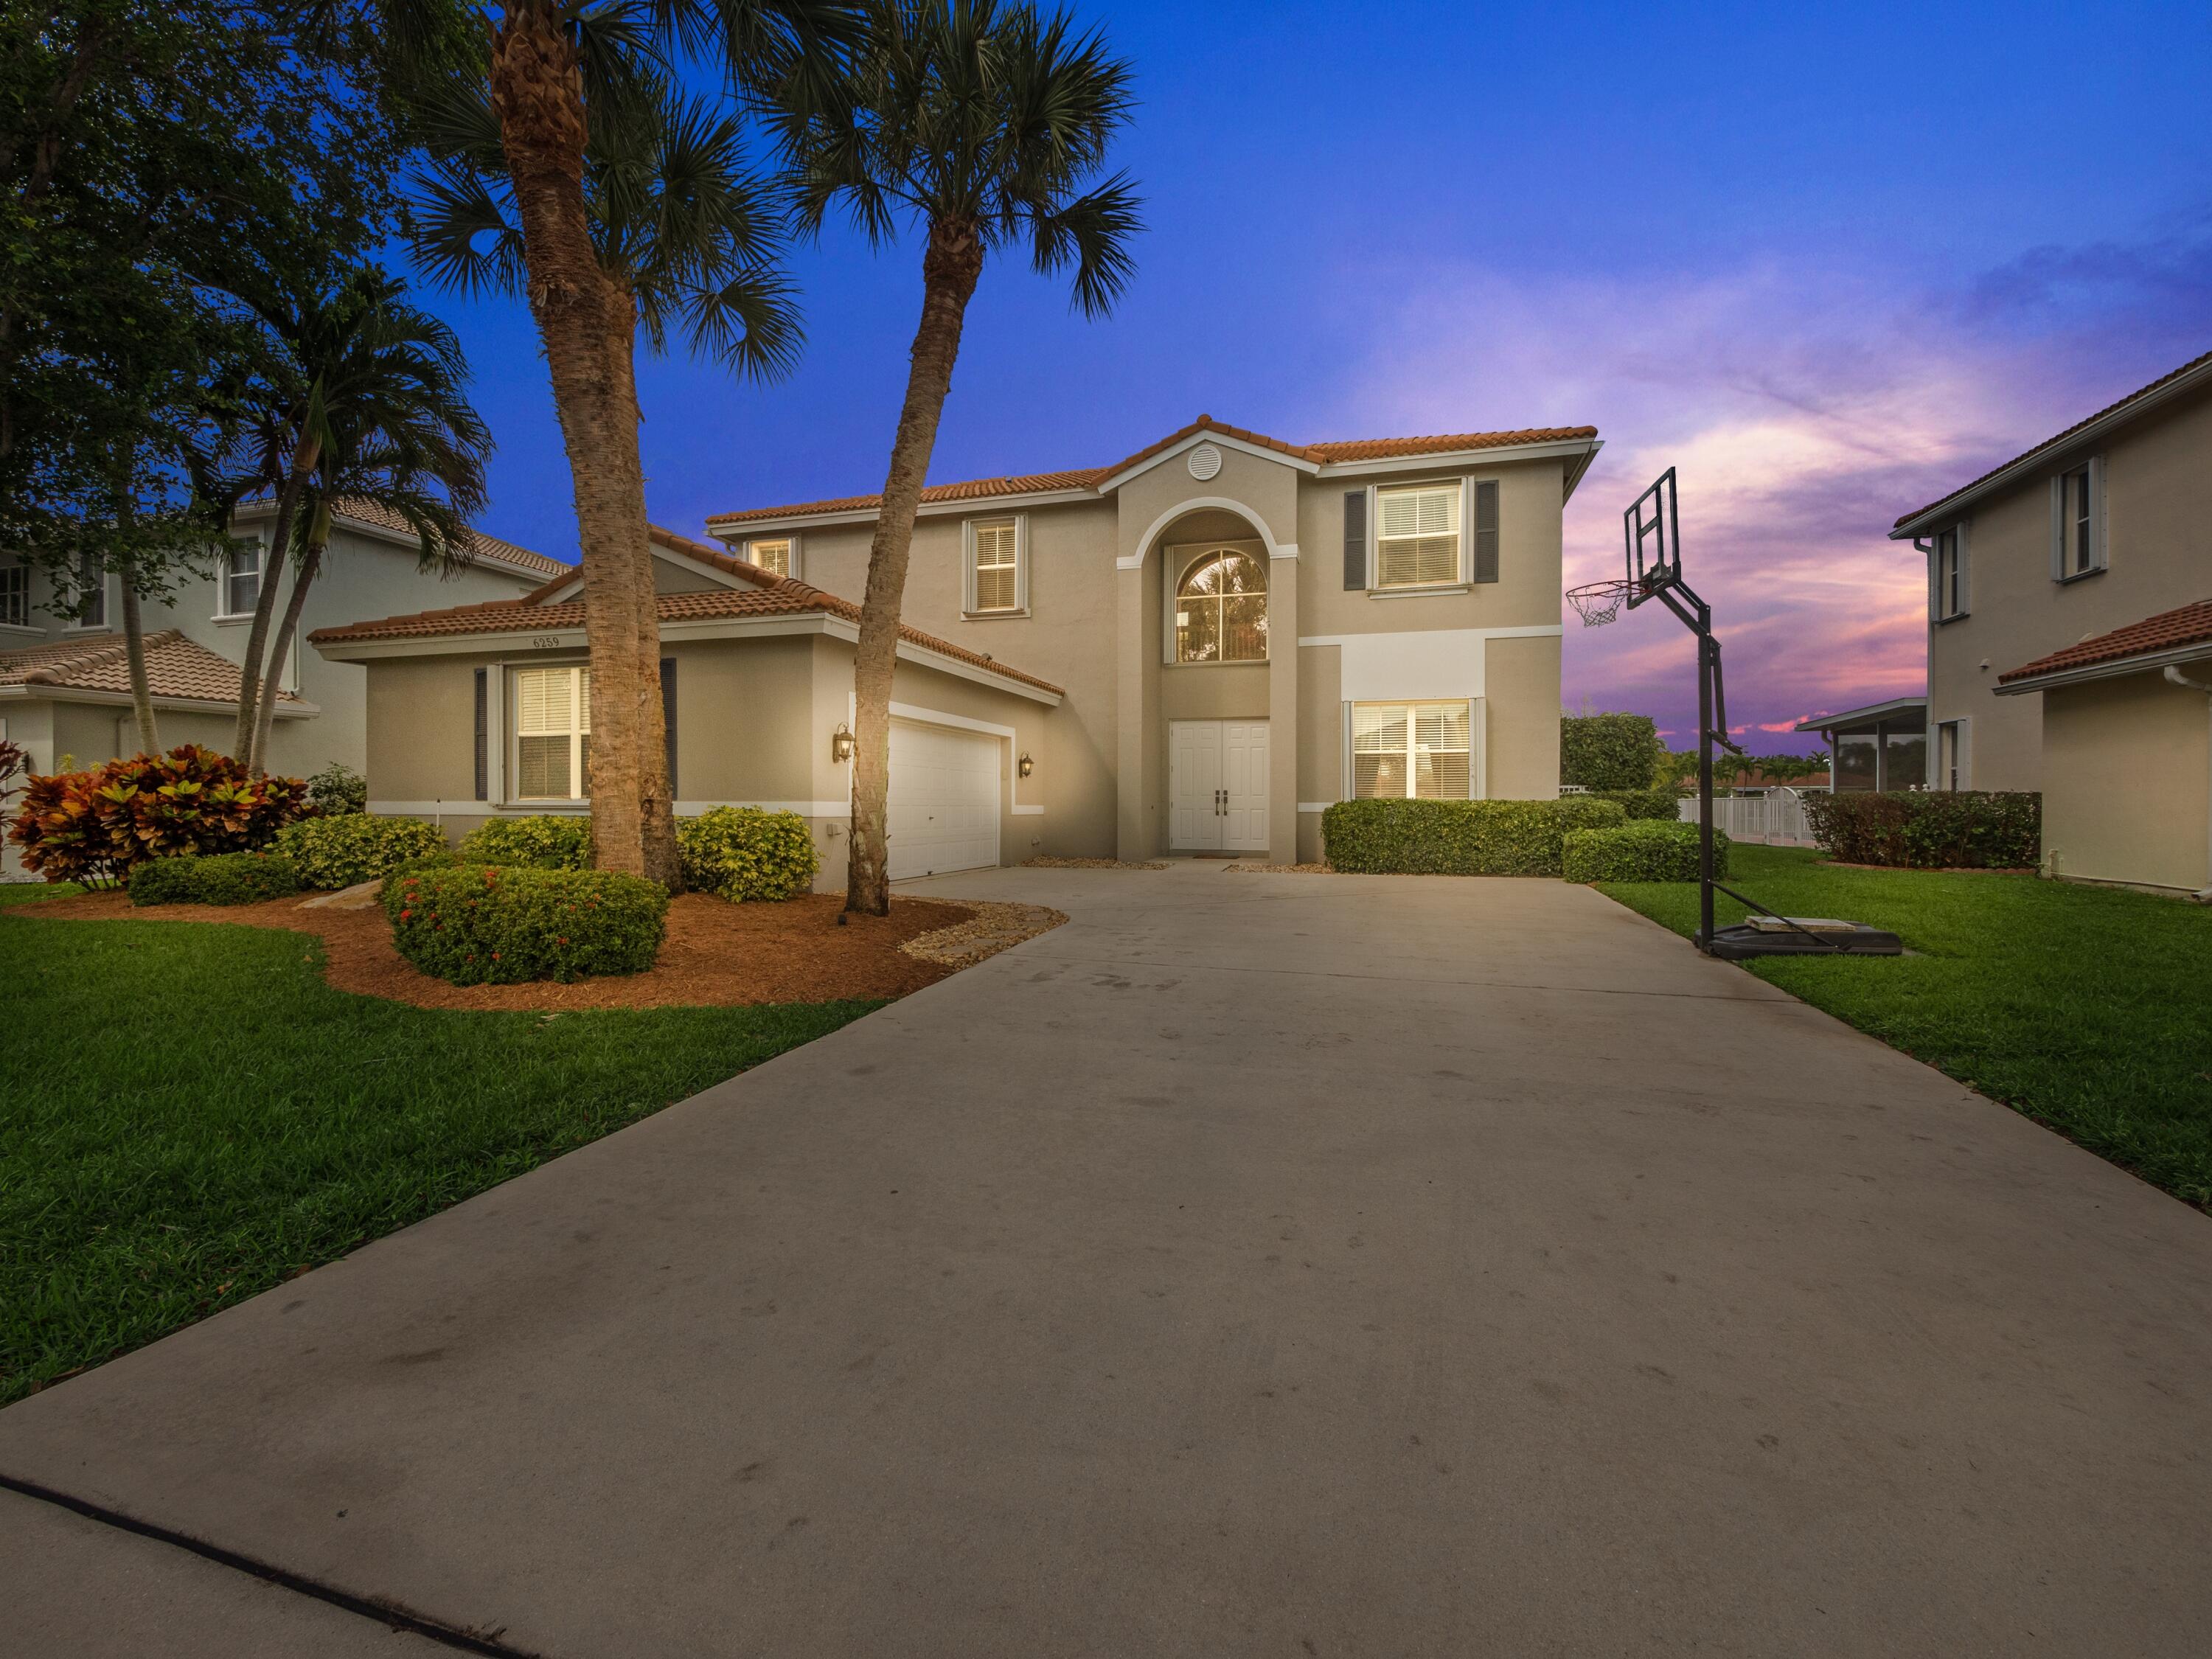 6259 Indian Forest Circle, Lake Worth, Palm Beach County, Florida - 5 Bedrooms  
3 Bathrooms - 